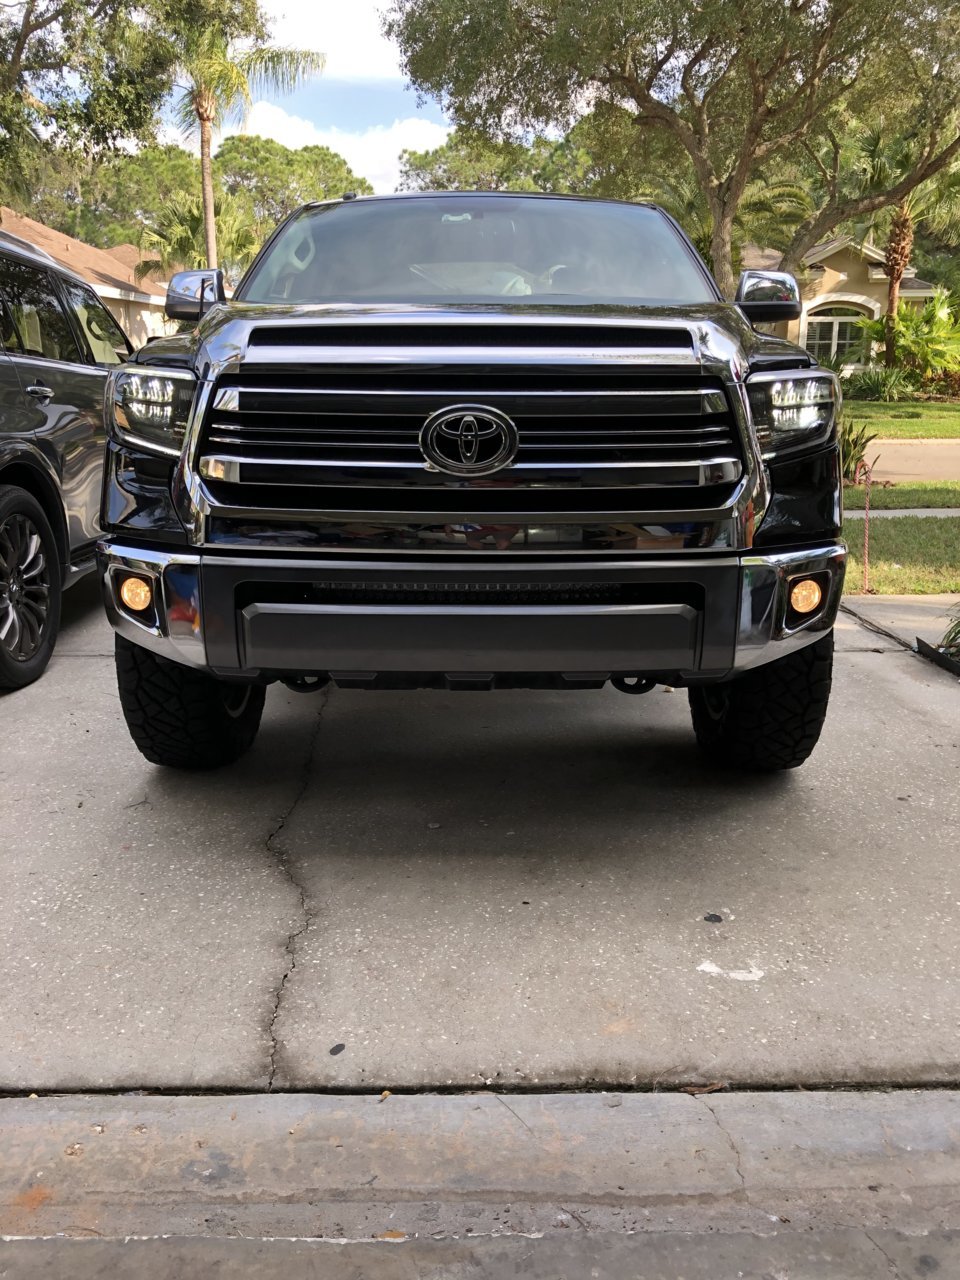 New OEM LED headlight - before & after | Toyota Tundra Forum